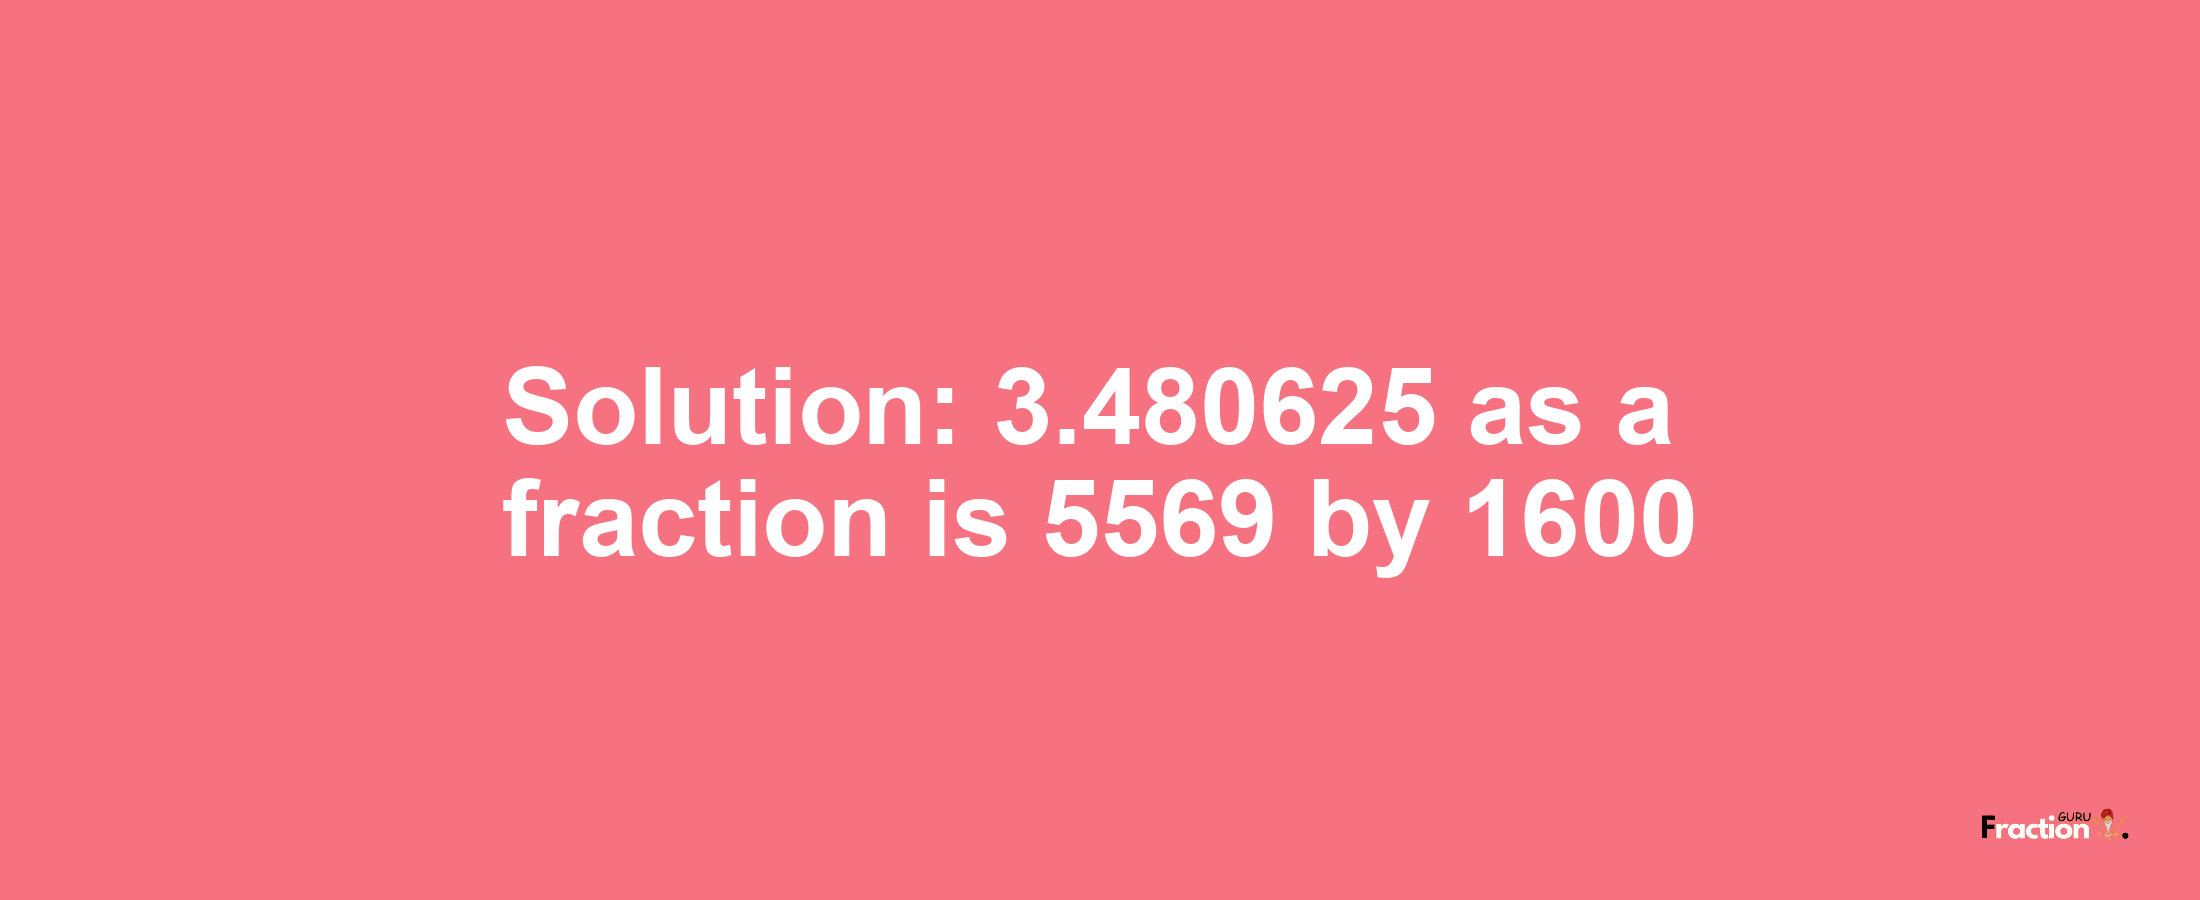 Solution:3.480625 as a fraction is 5569/1600